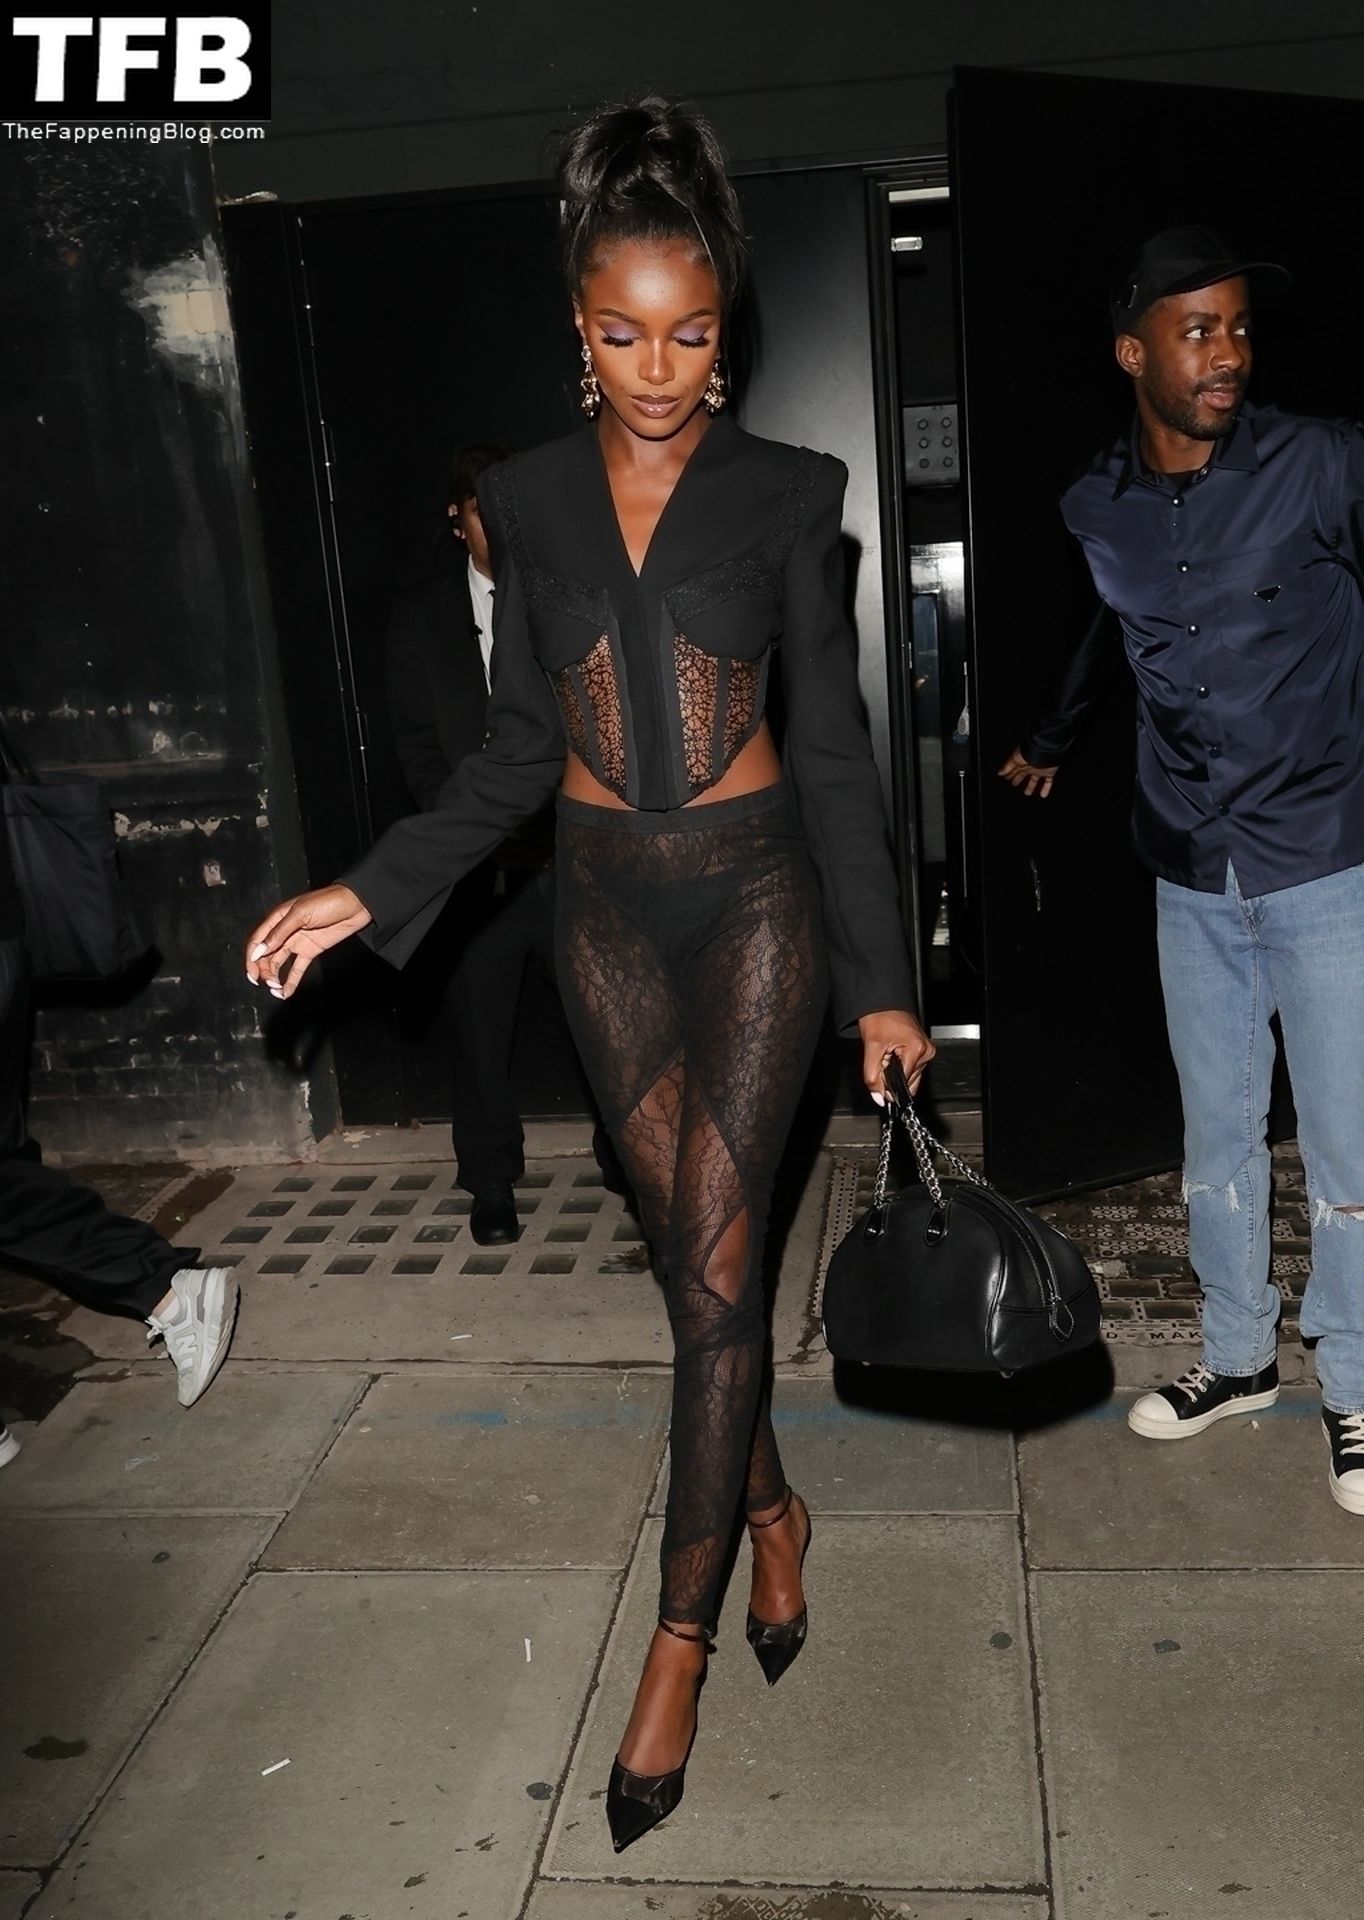 Leomie-Anderson-See-Through-The-Fappening-Blog-10.jpg